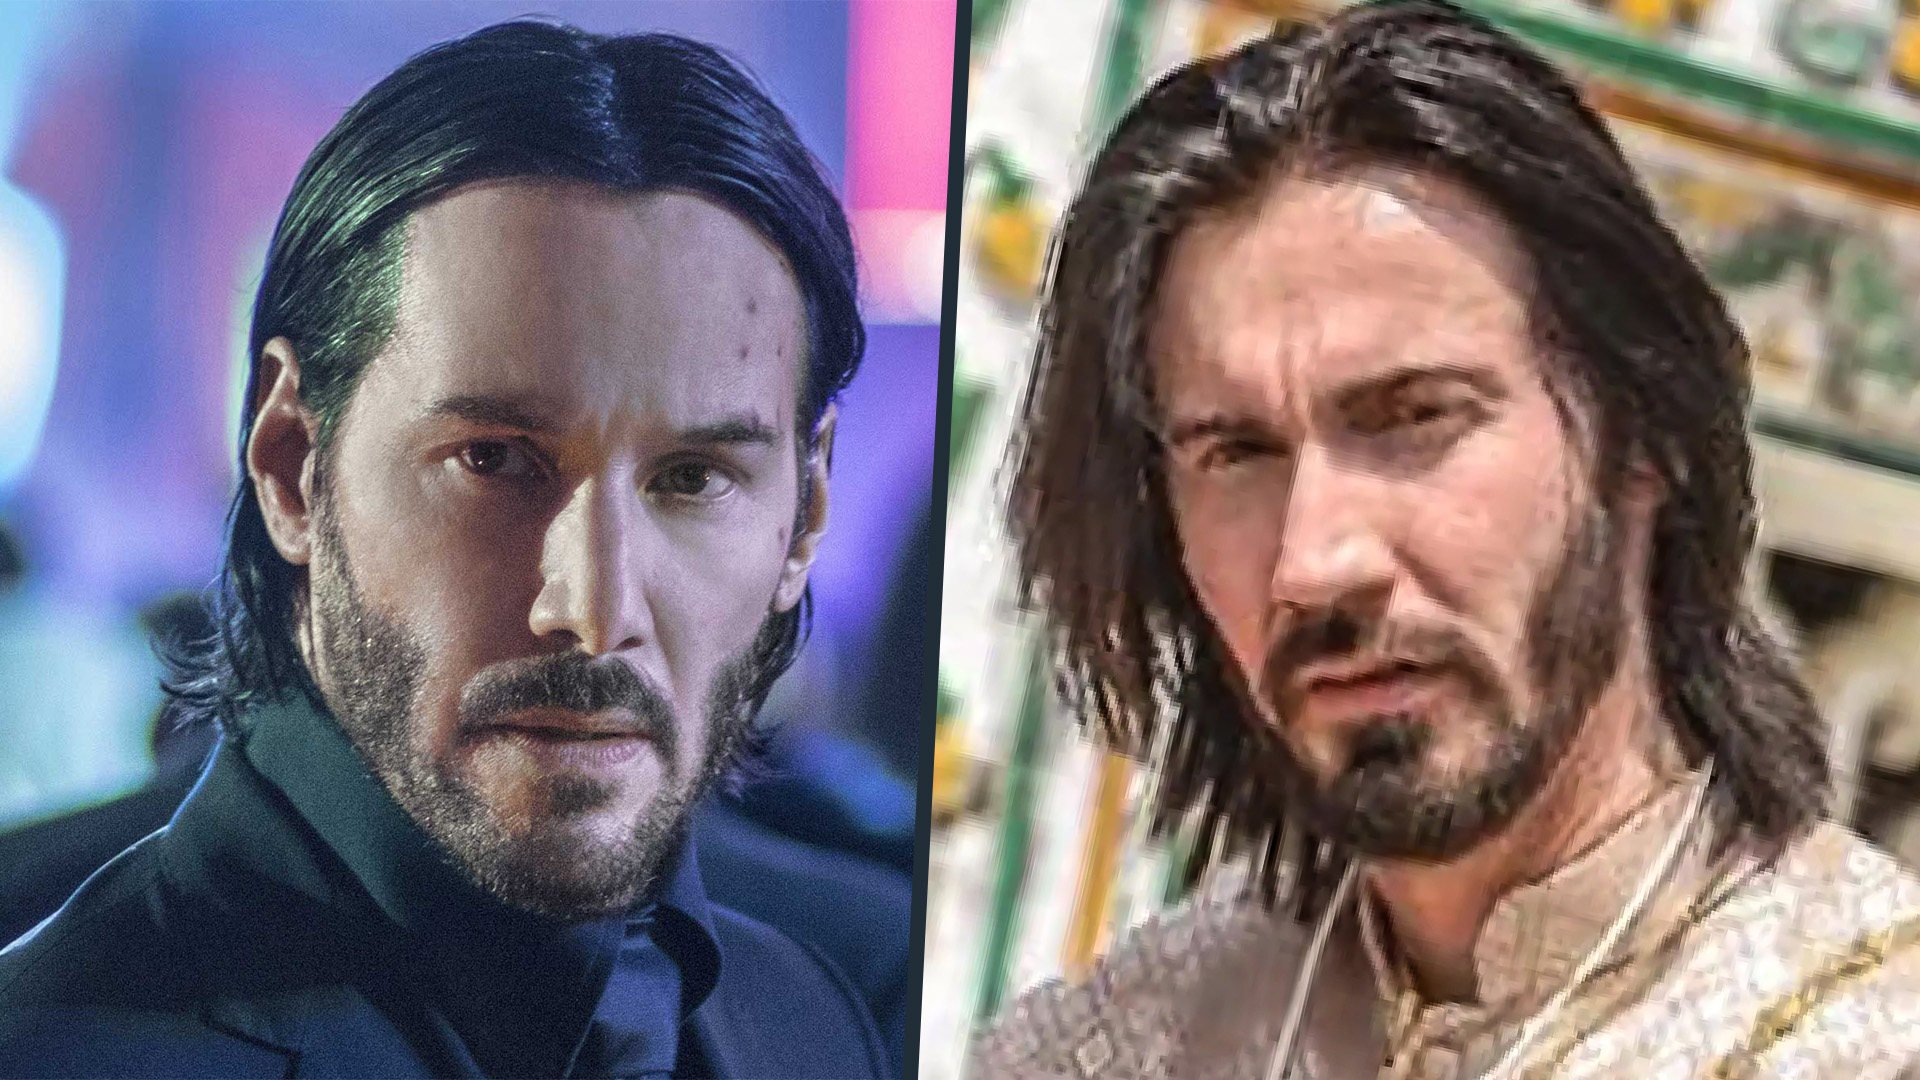 A German man has become a global online hit and sparked a media frenzy in Thailand because of his staggering resemblance to Hollywood superstar, Keanu Reeves. Photo: SCMP composite/TikTok/Lionsgate